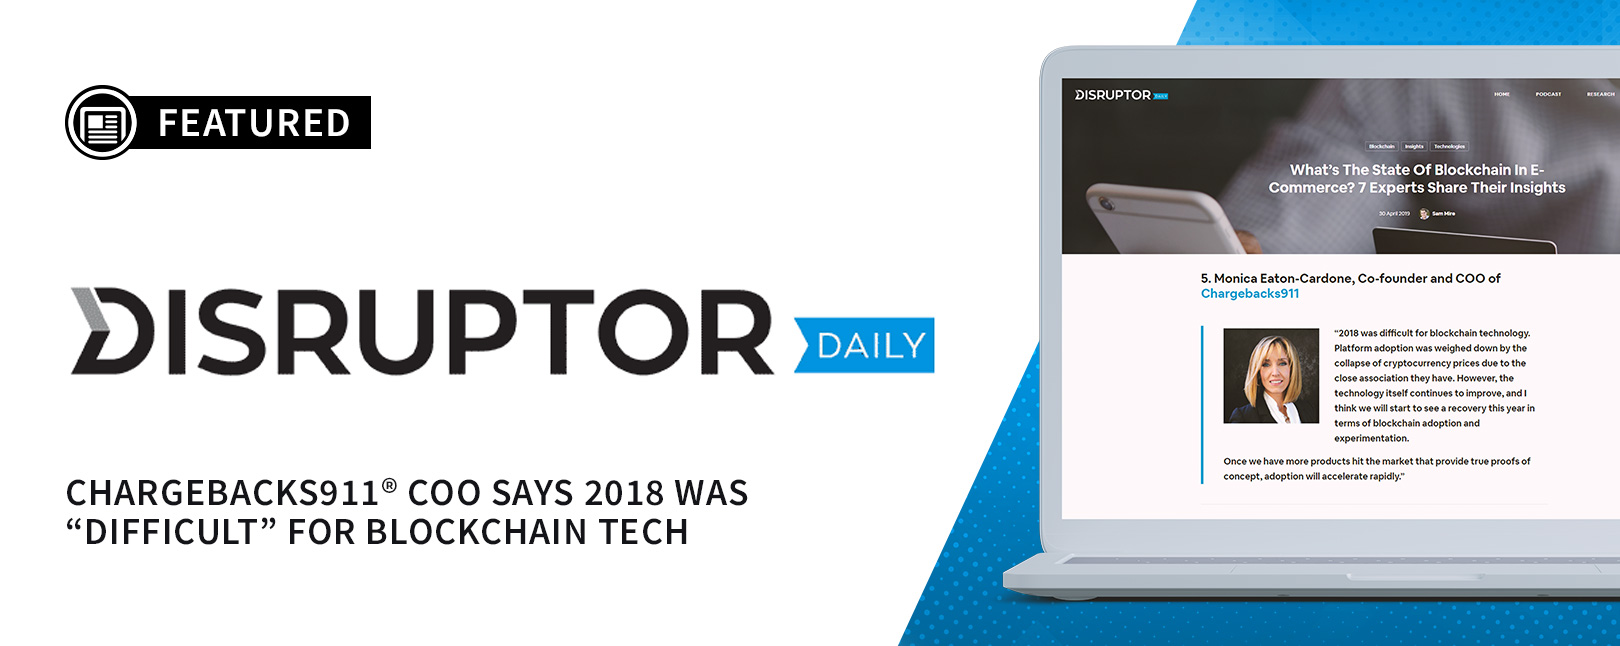 Press - Disruptor Daily - Chargebacks911® COO Says 2018 Was “Difficult” for Blockchain-blog